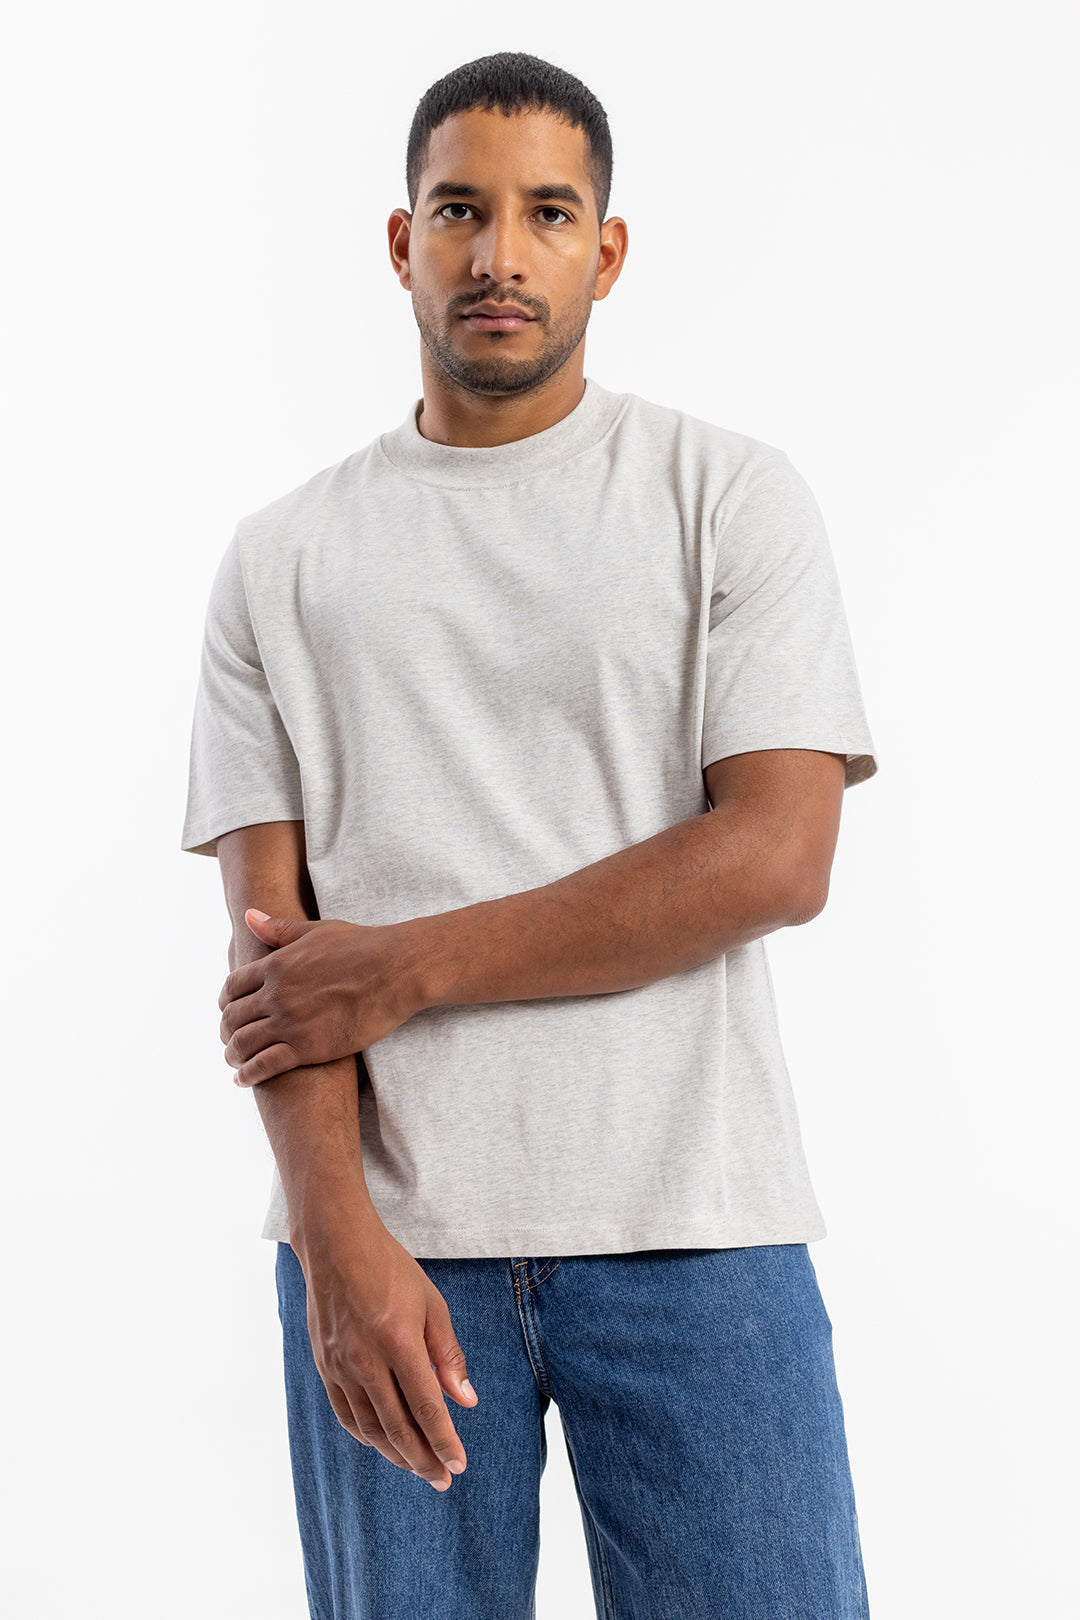 Gray T-shirt made from 100% organic cotton from Rotholz